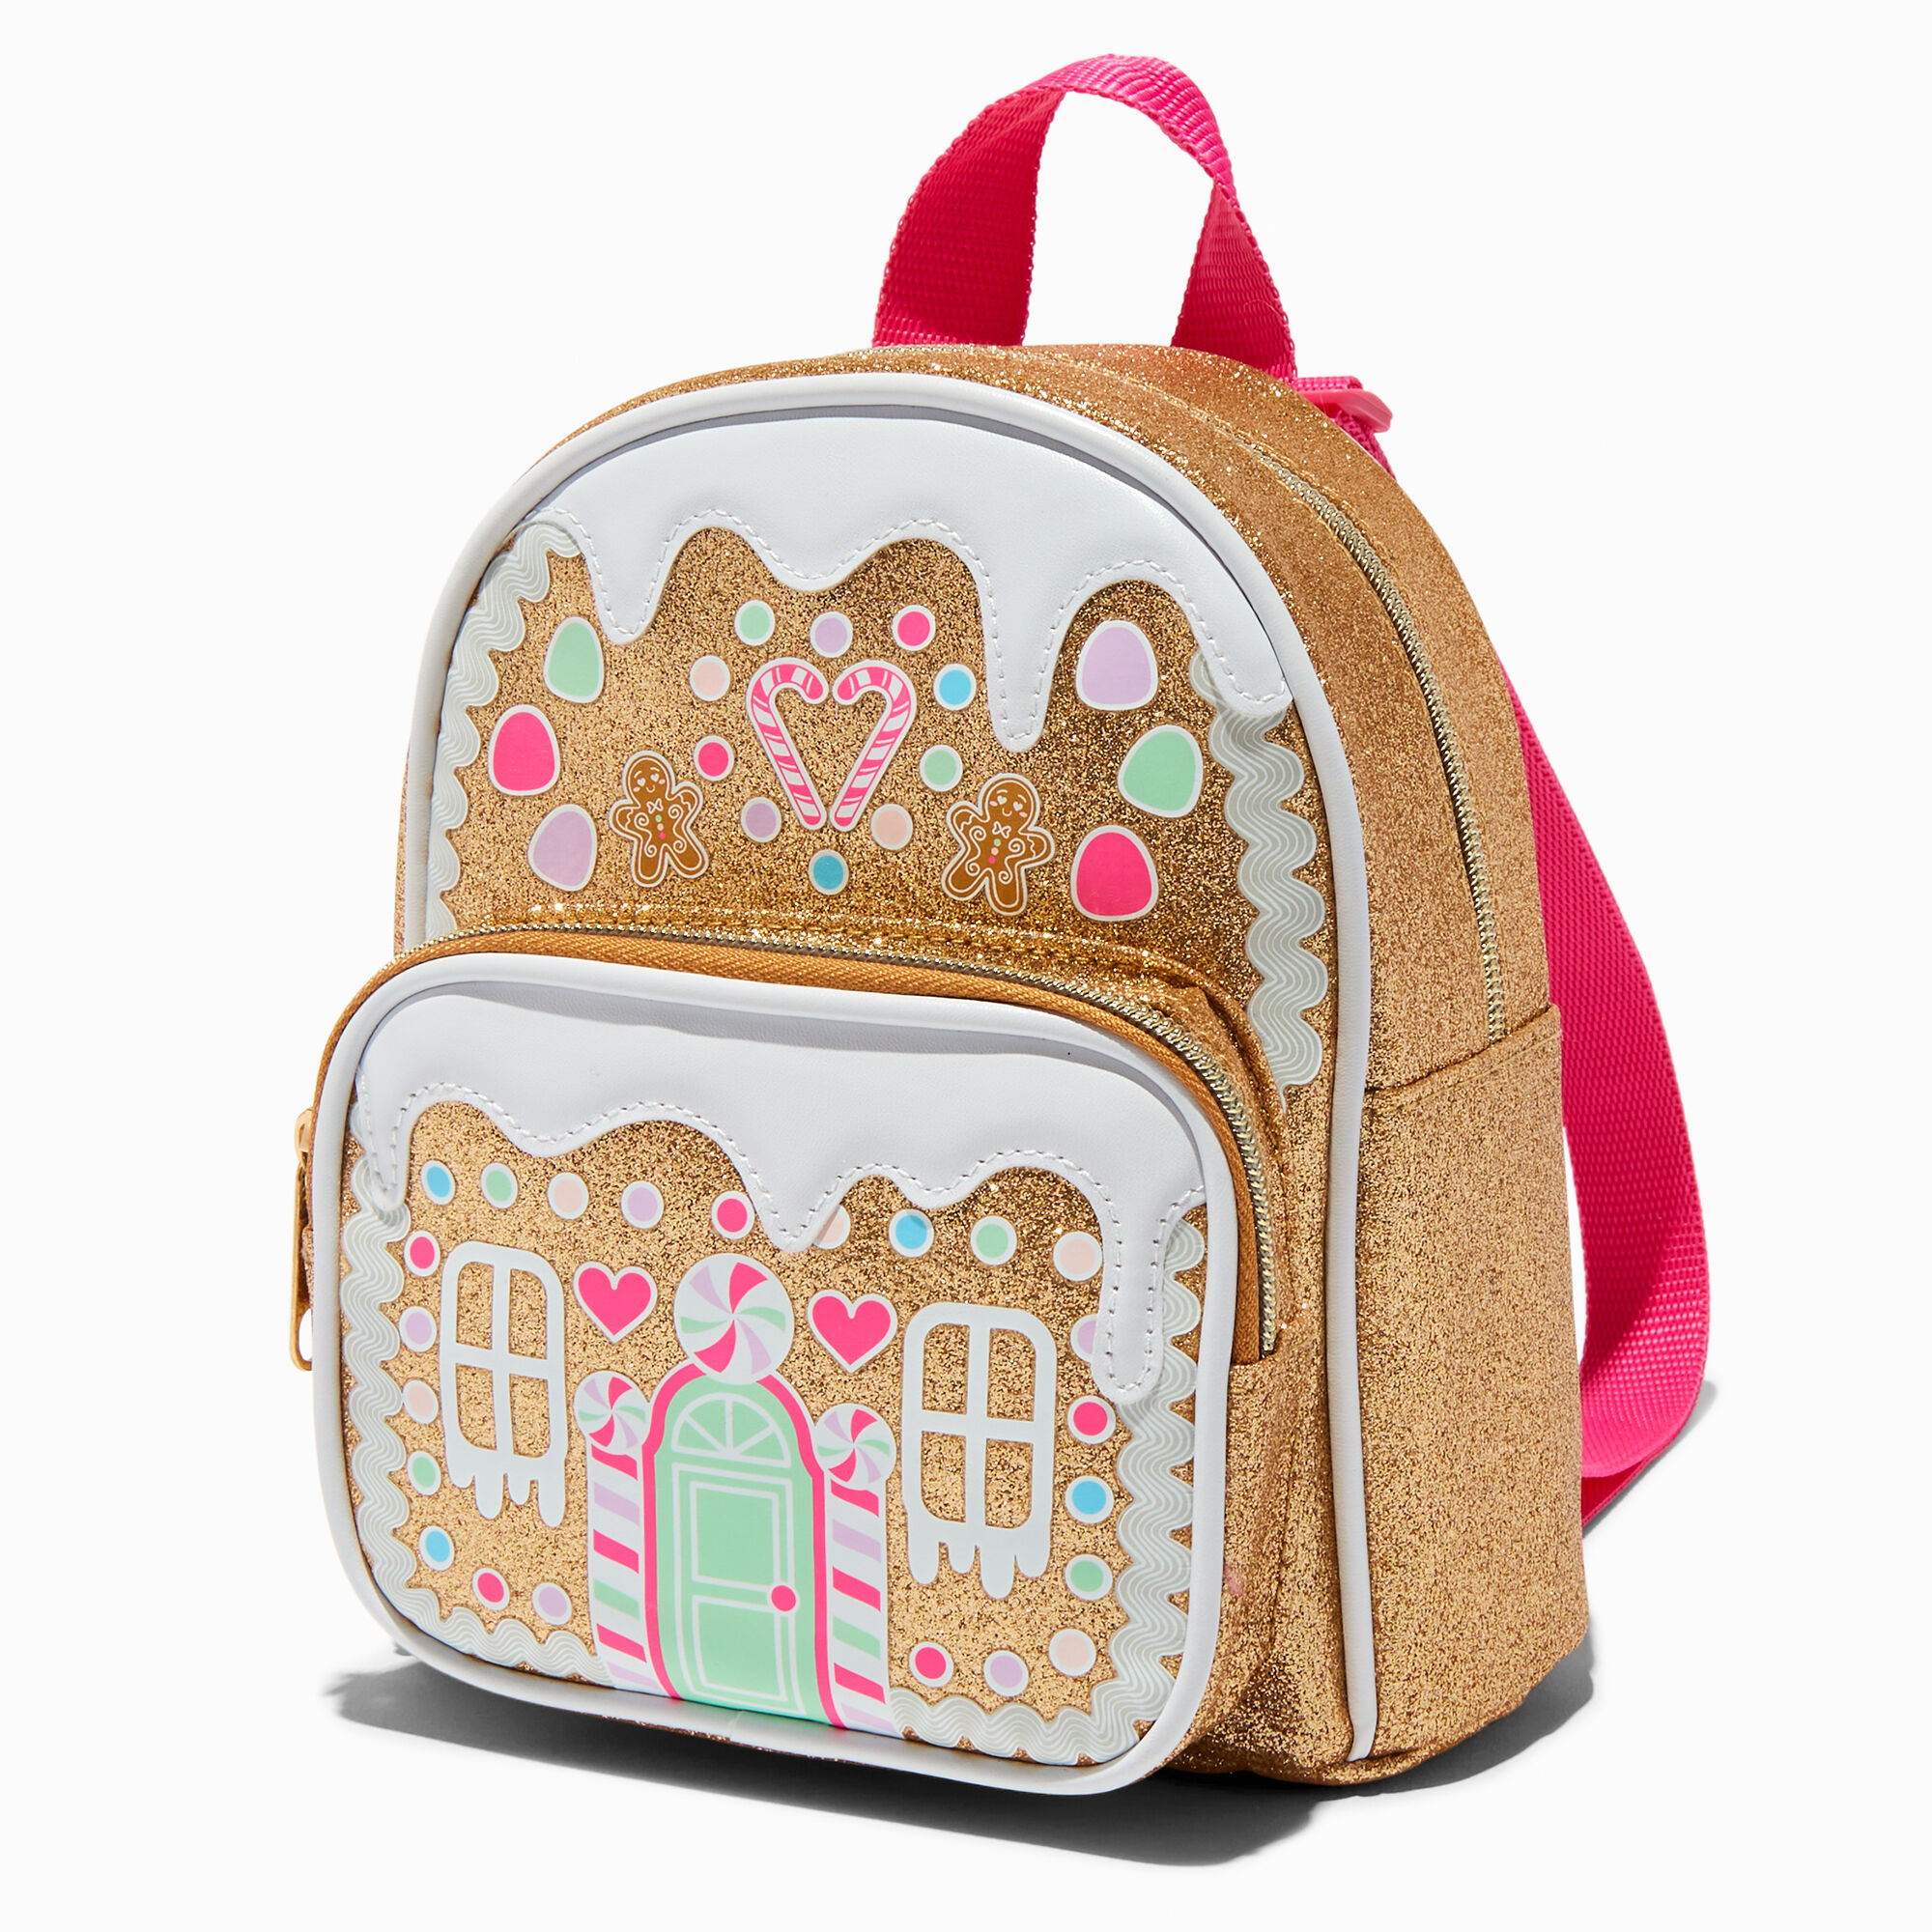 View Claires Christmas Gingerbread House Small Backpack information